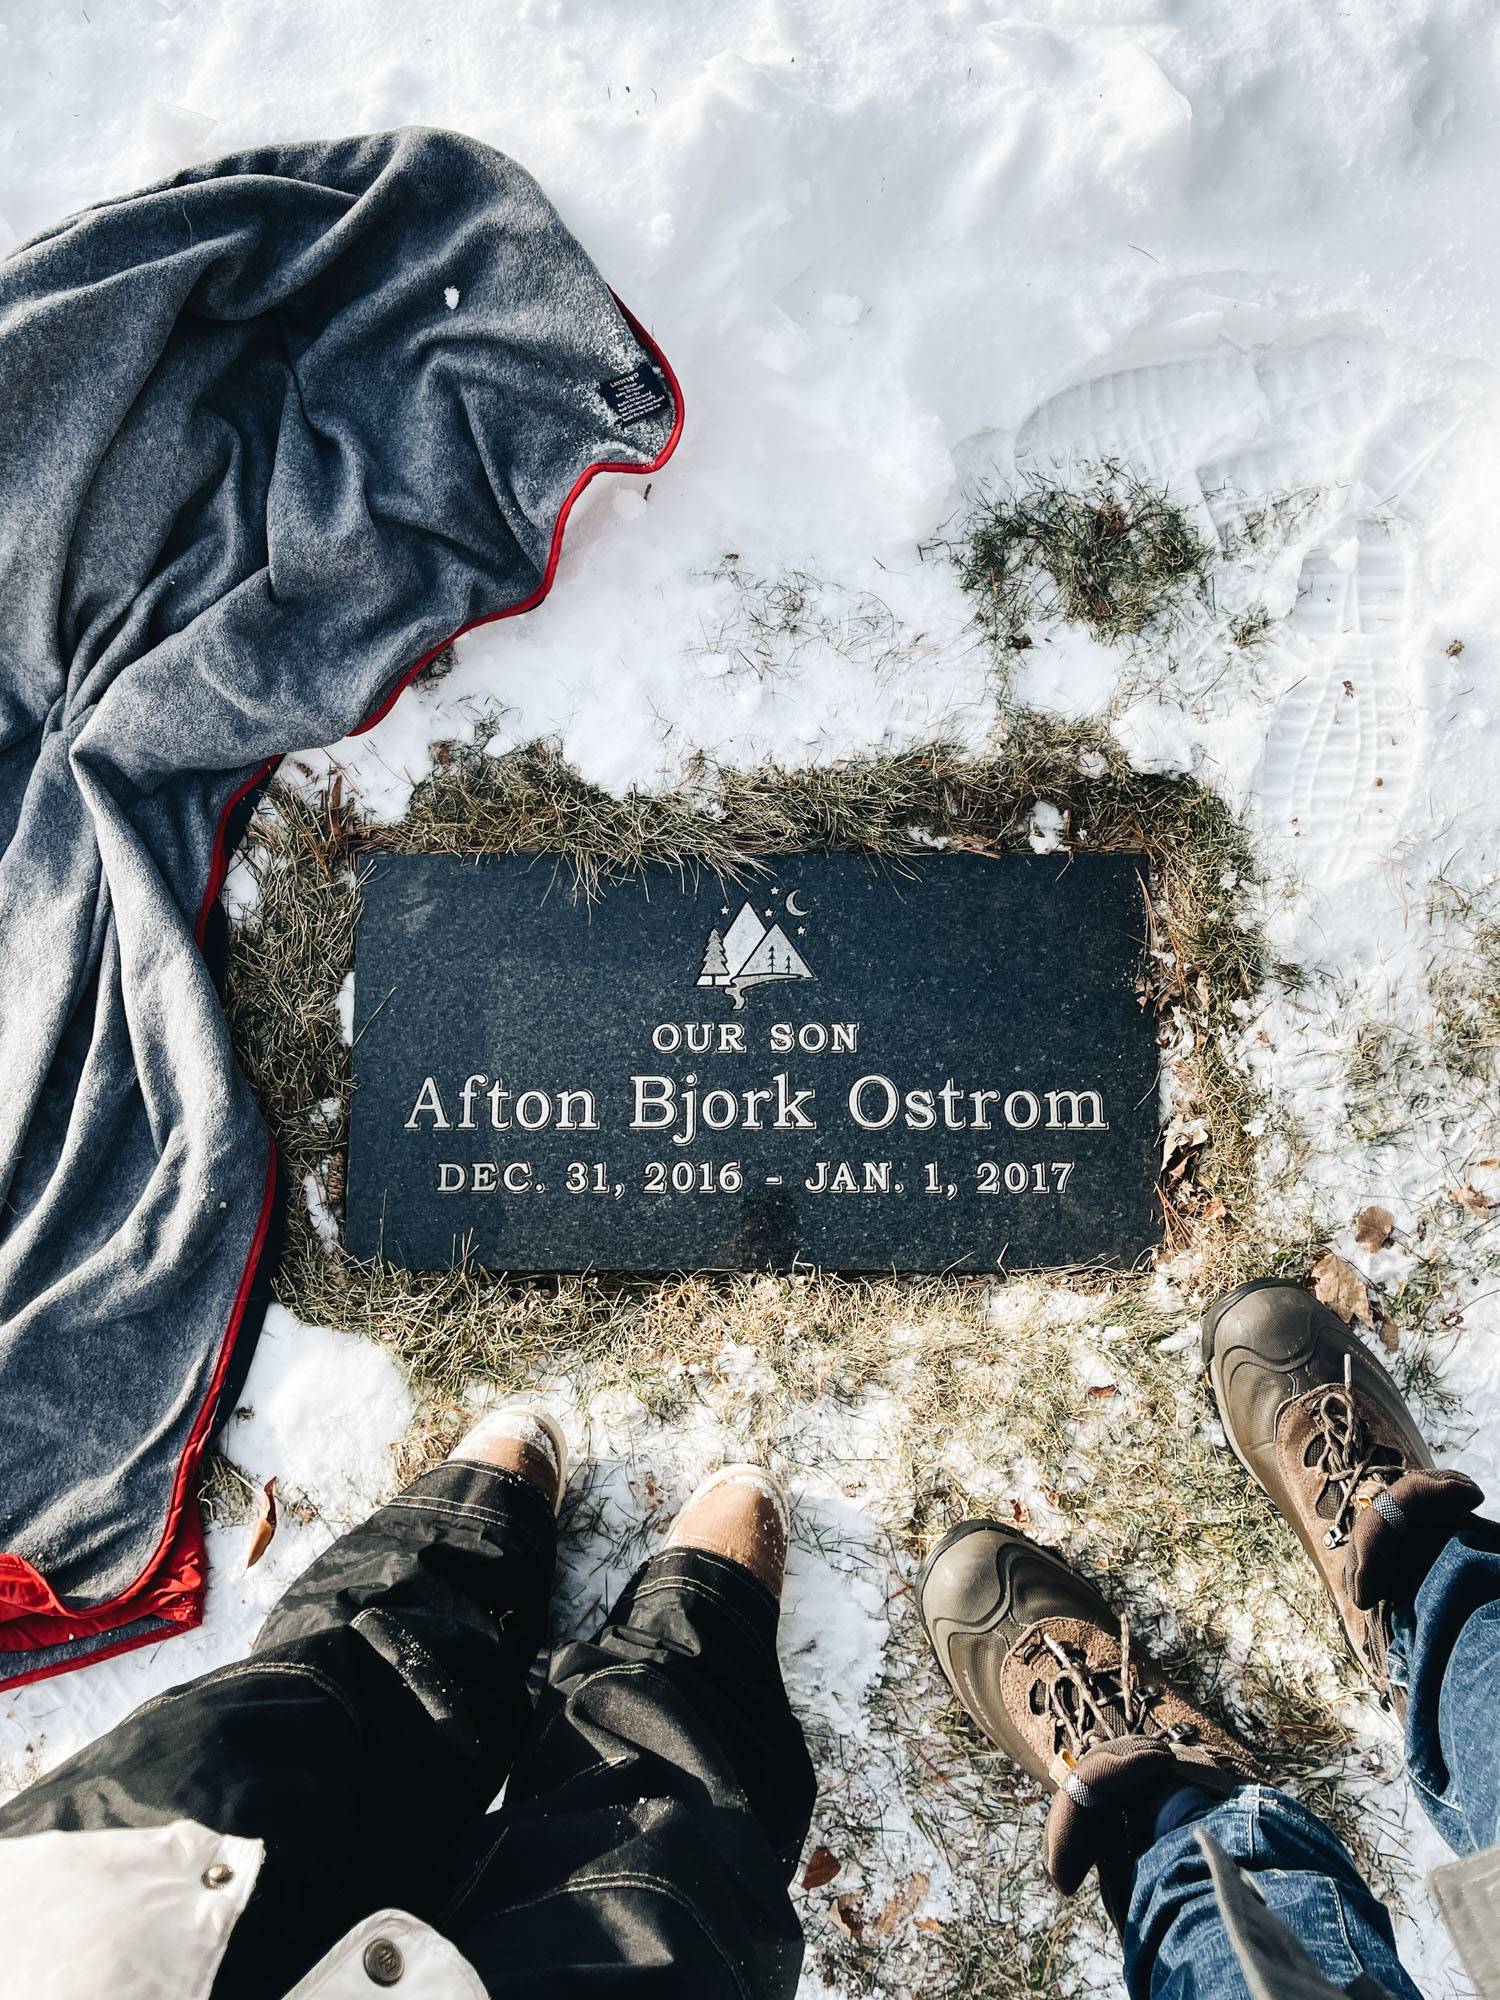 Two pairs of feet next to a grave surrounded by snow.